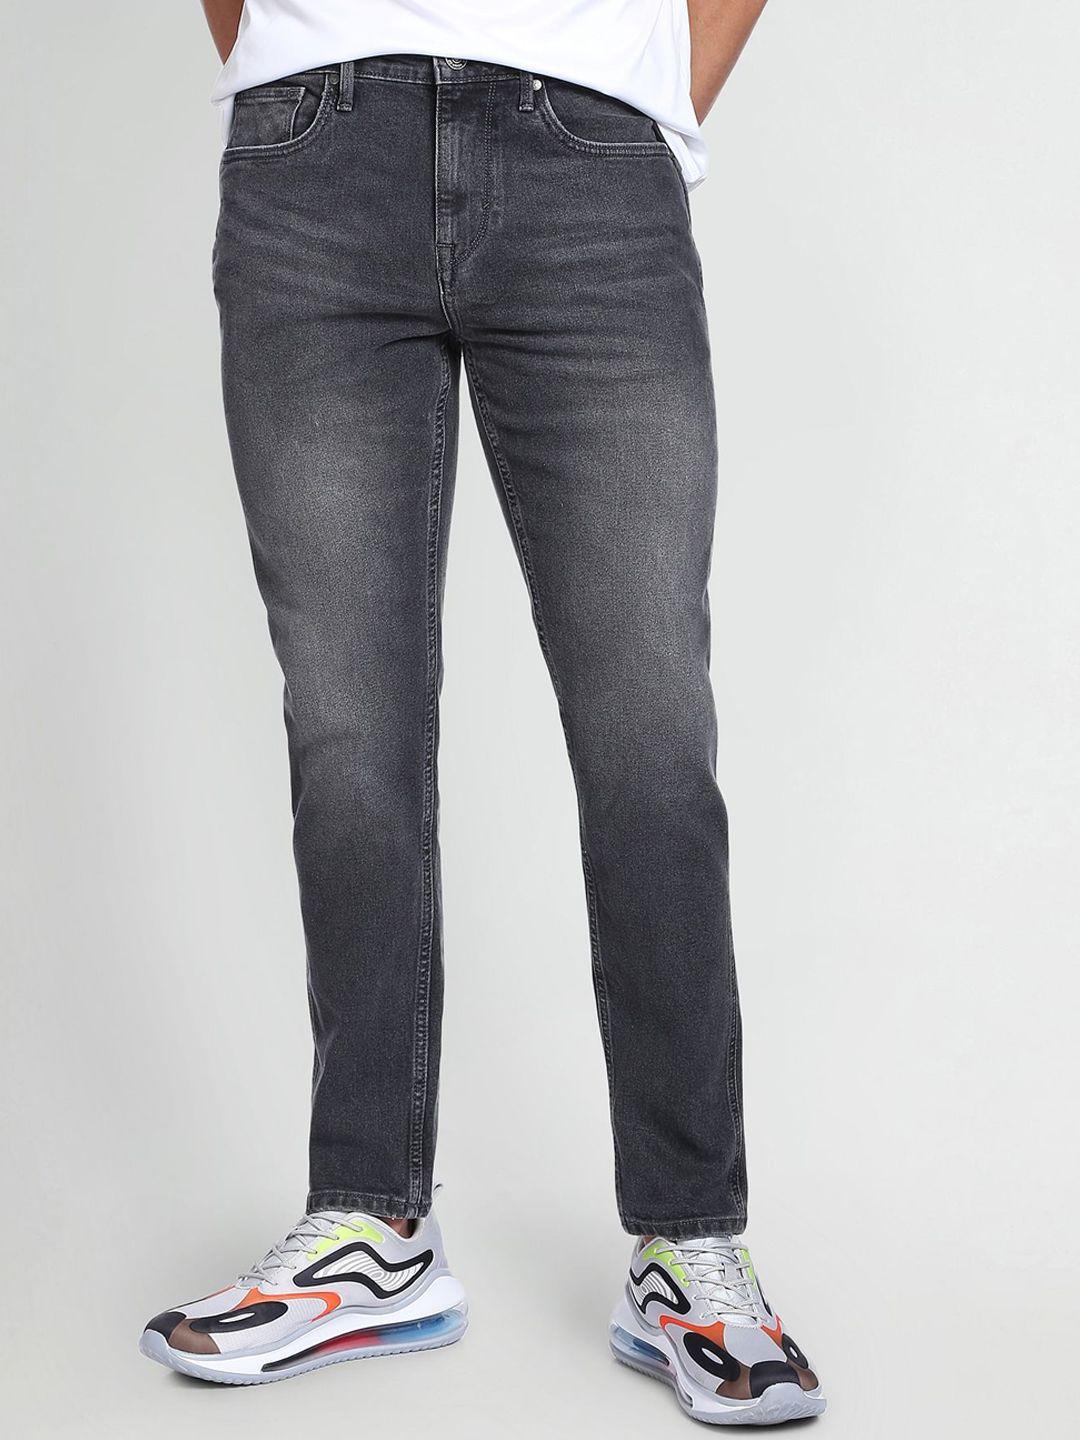 flying machine slim tapered fit whiskered 90s vintage jeans